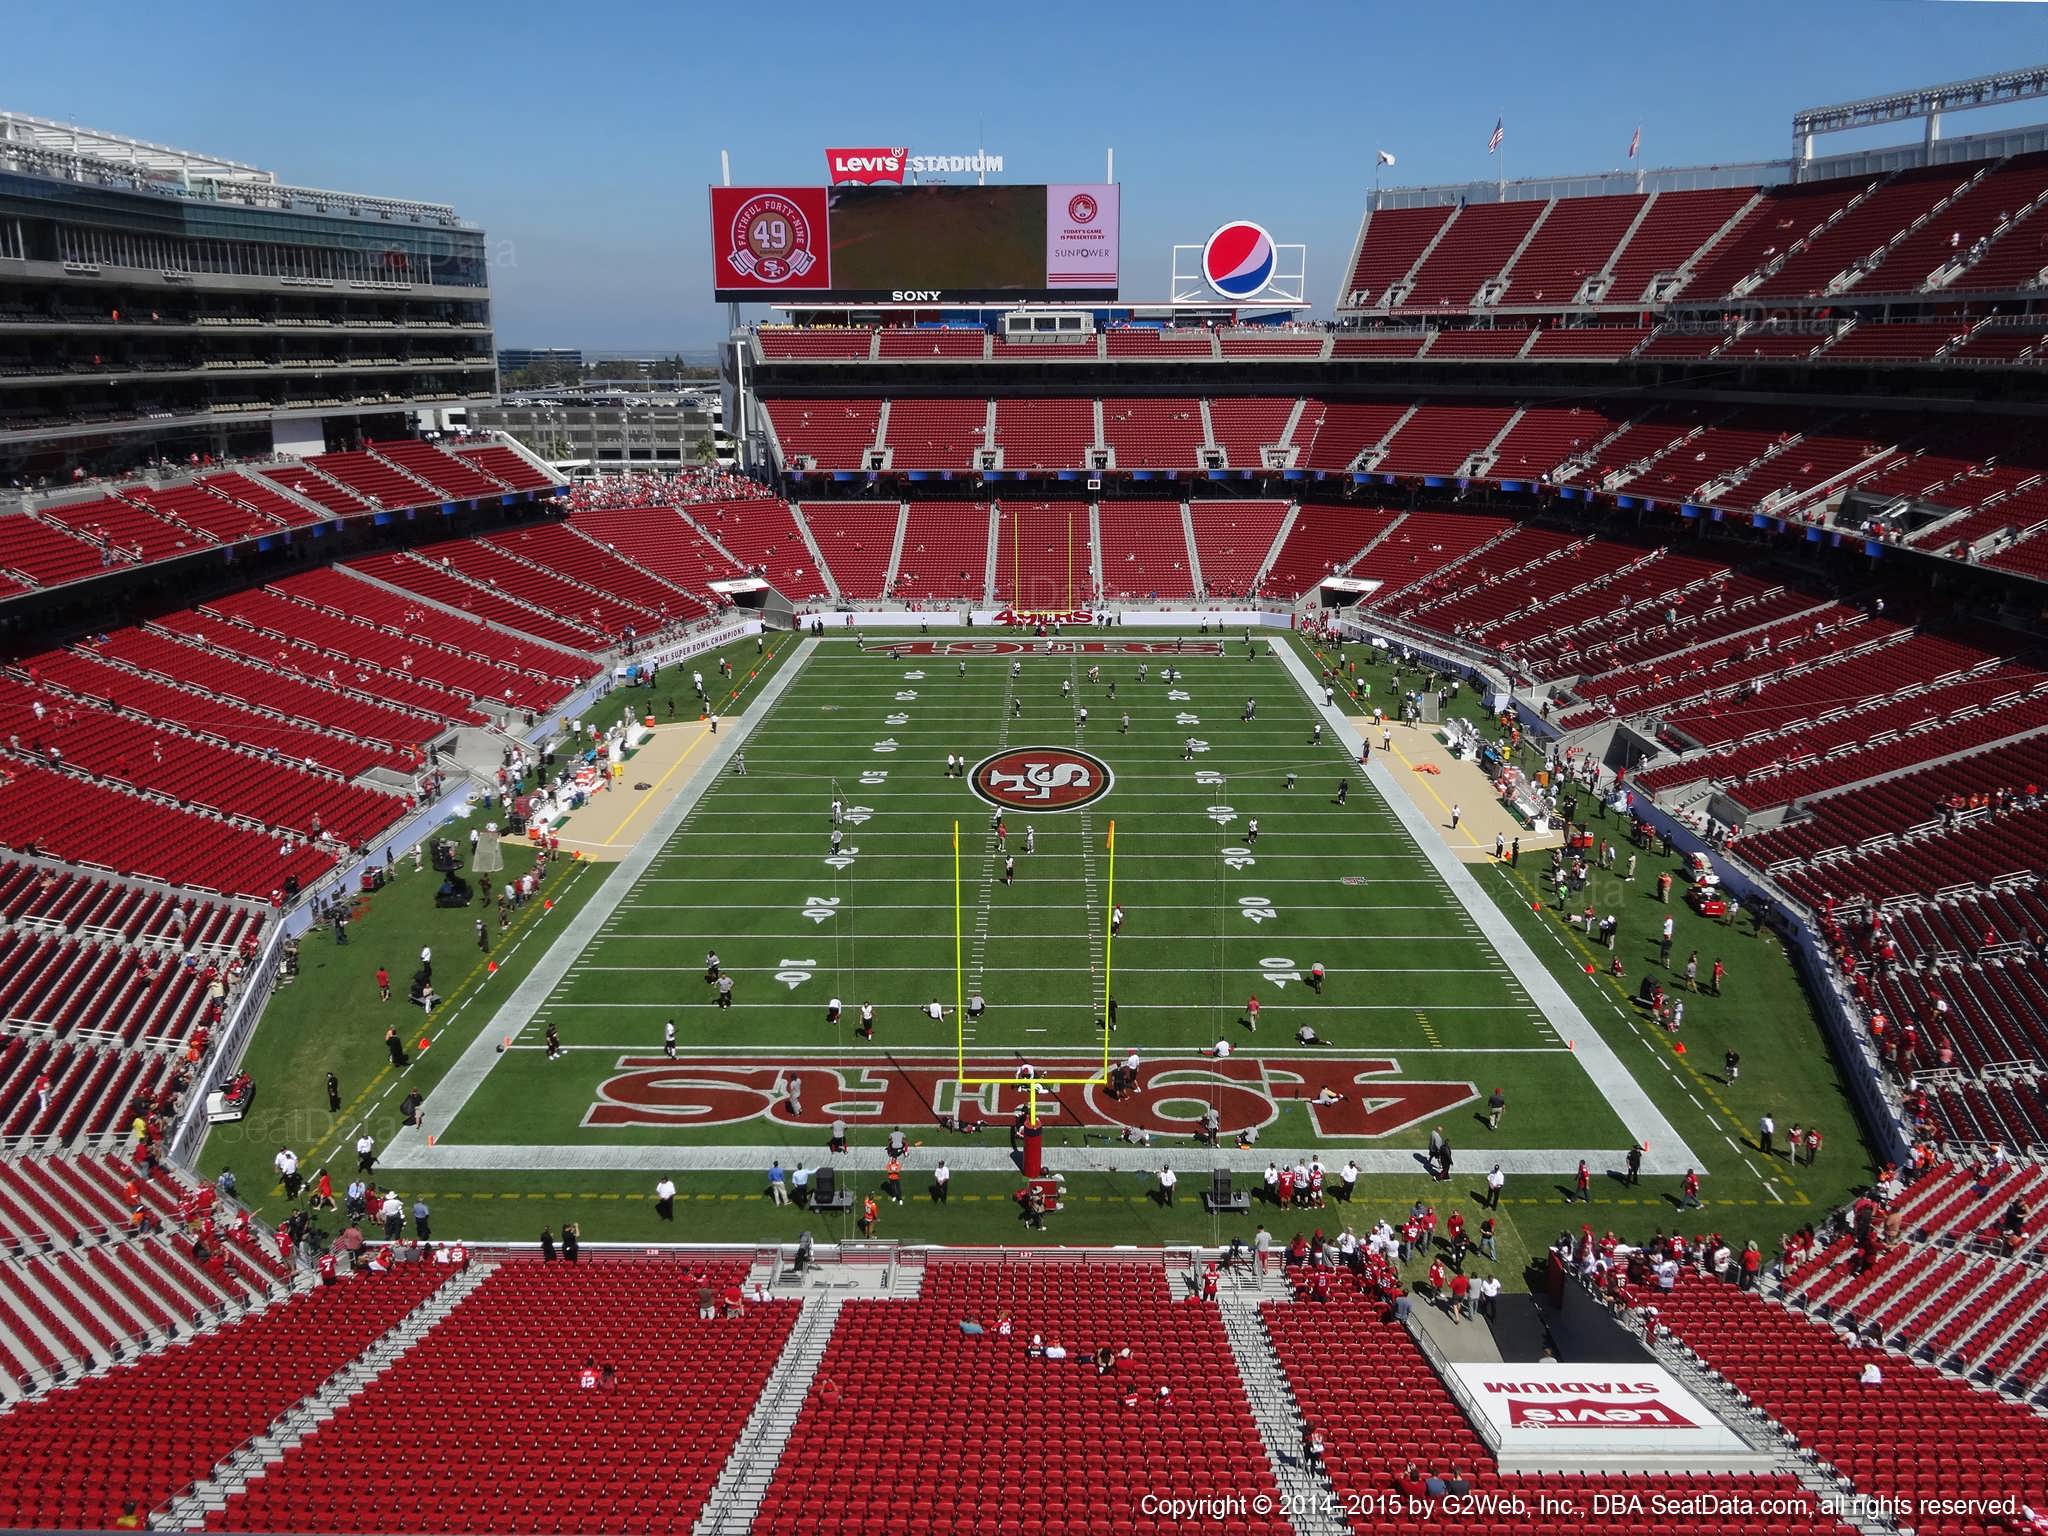 Seat view from section 326 at Levi’s Stadium, home of the San Francisco 49ers